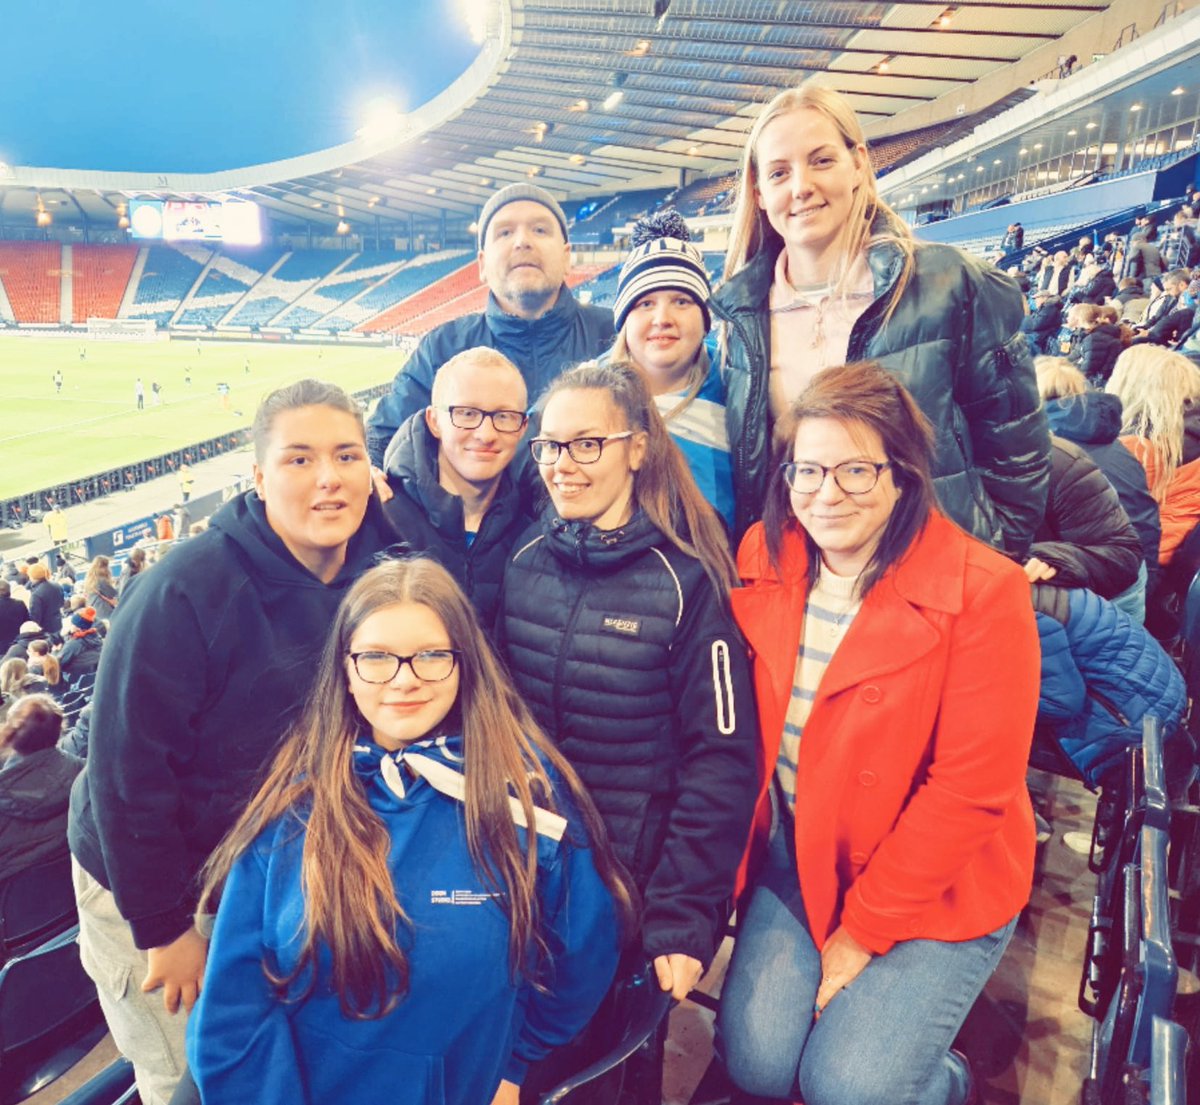 Arniston Rangers Ladies Team and Coaches supporting @ScotlandNT to victory @HampdenPark tonight 🇱🇻🏴󠁧󠁢󠁳󠁣󠁴󠁿